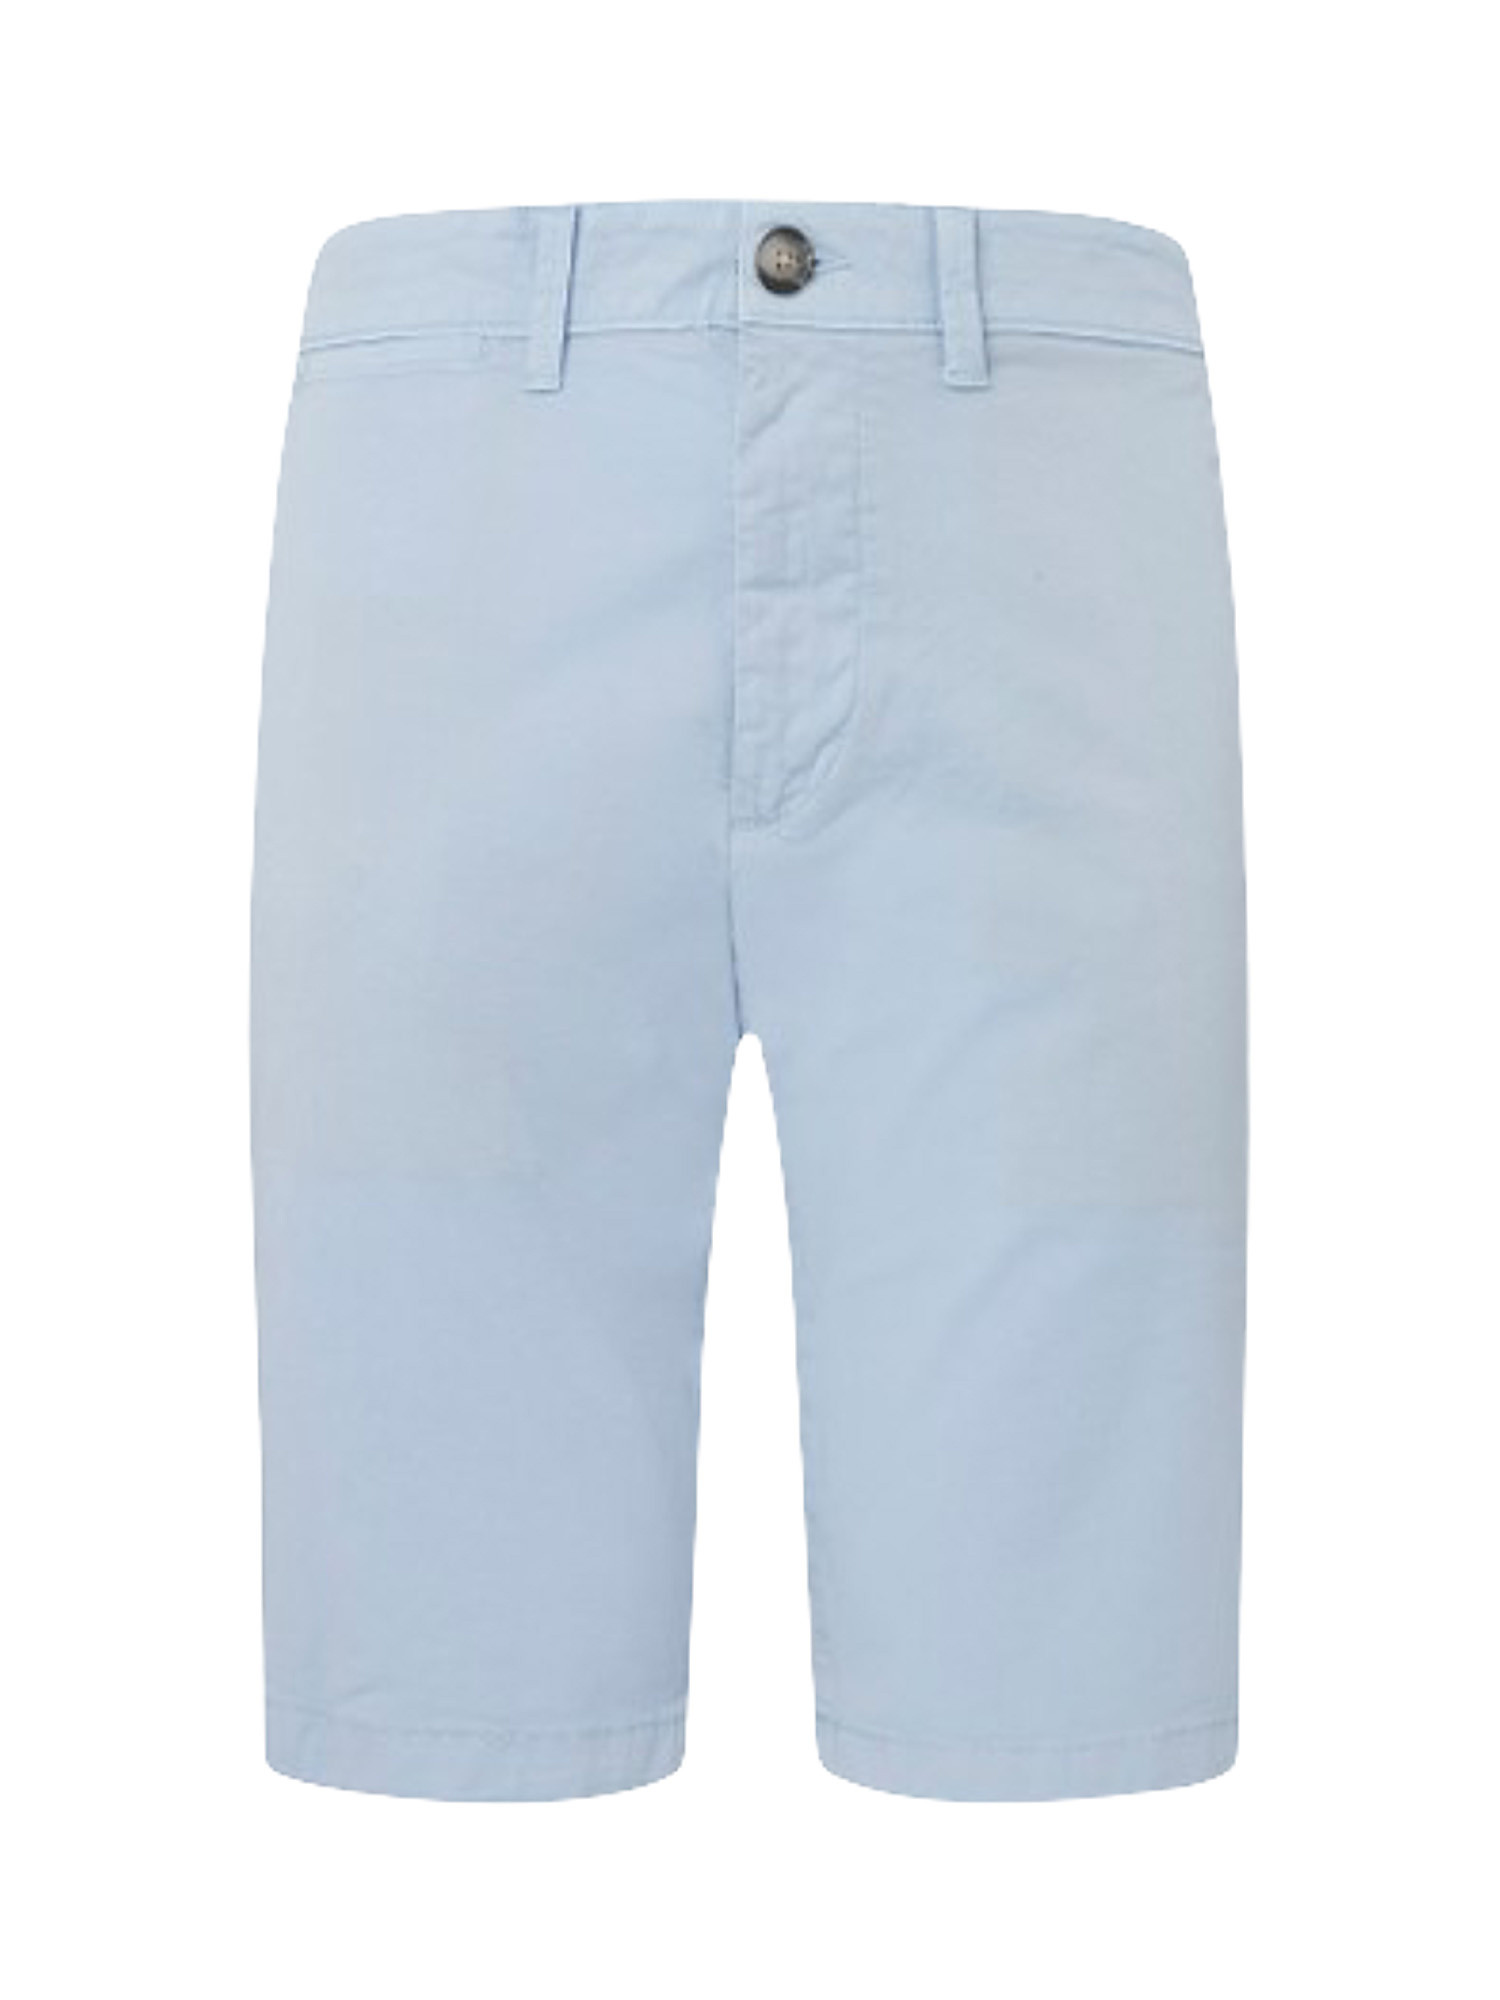 Mc queen  chino-style bermuda shorts, Light Blue, large image number 0